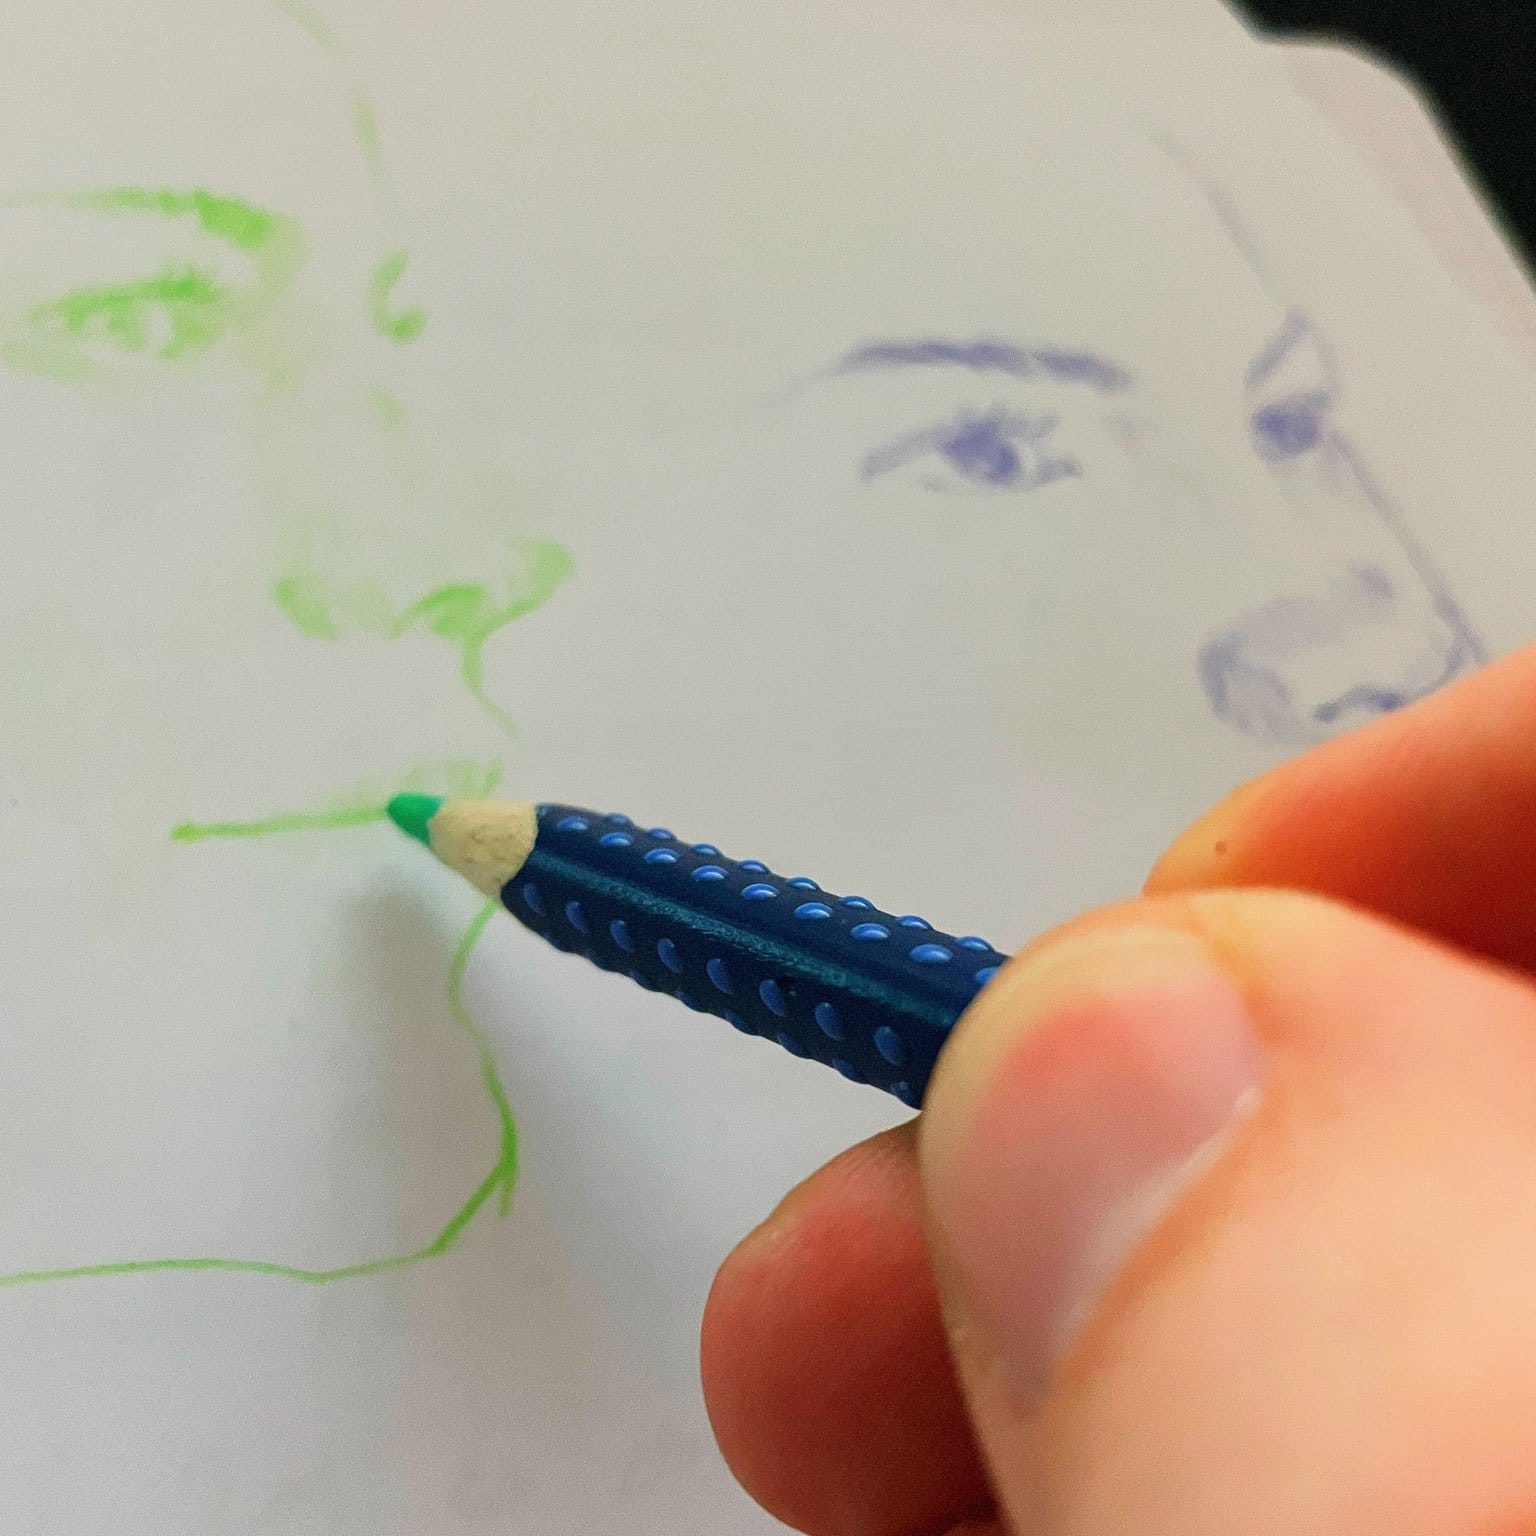 A portrait of a woman is drawn by a hand holding a green crayon.